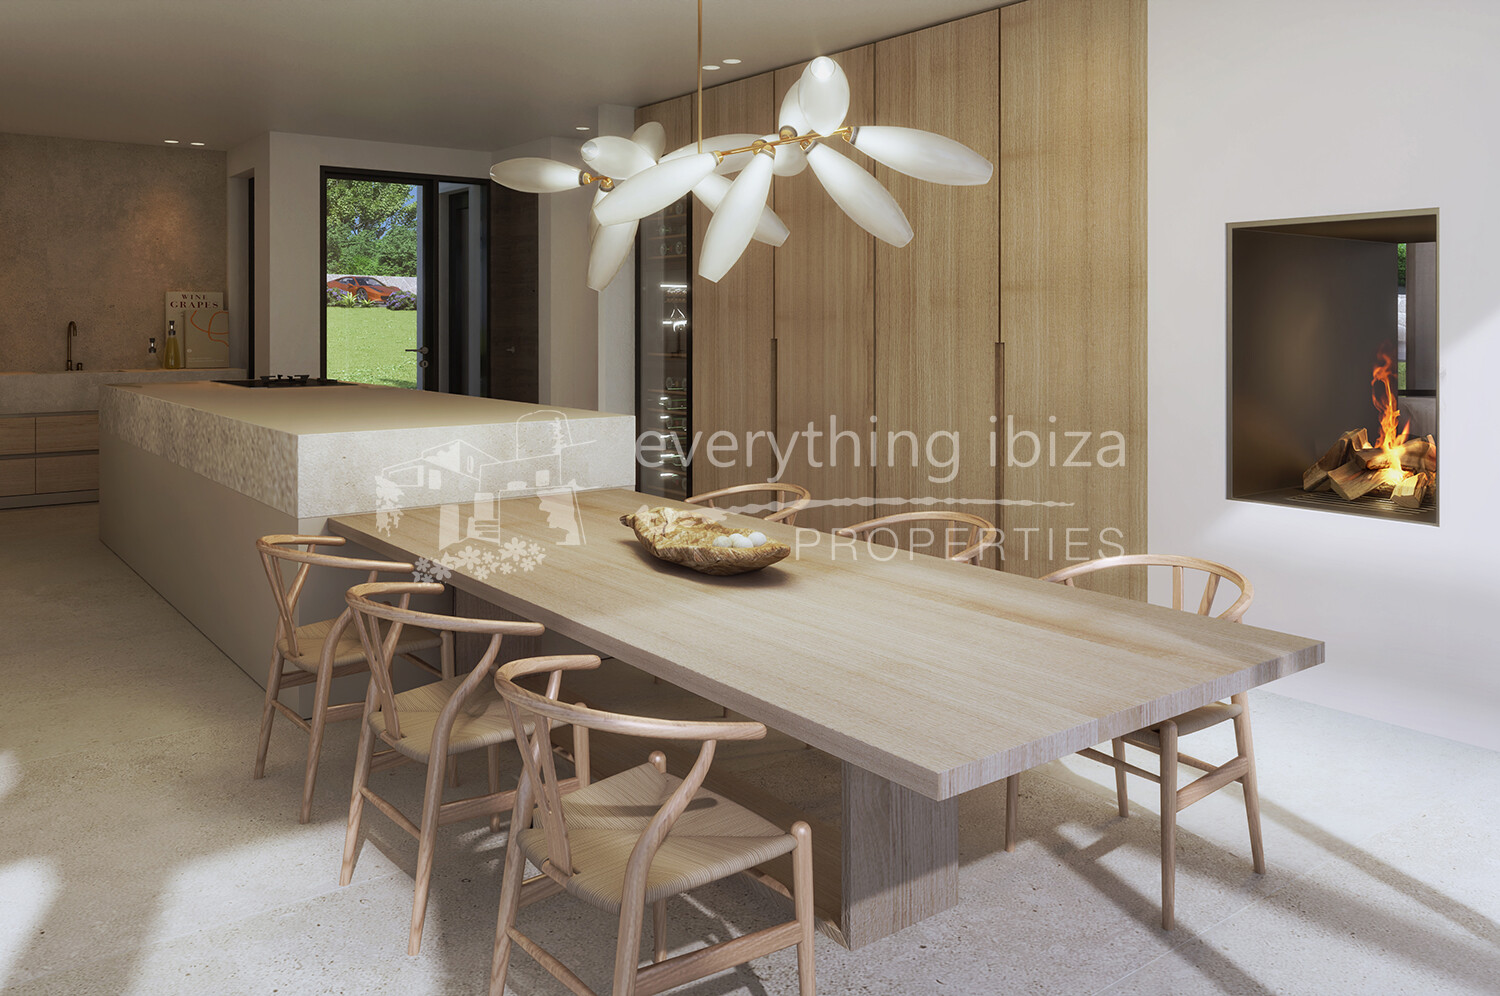 Magnificent New Villa Close to Santa Gertrudis with a Plot of 23.000m2, ref. 1722, for sale in Ibiza by everything ibiza Properties